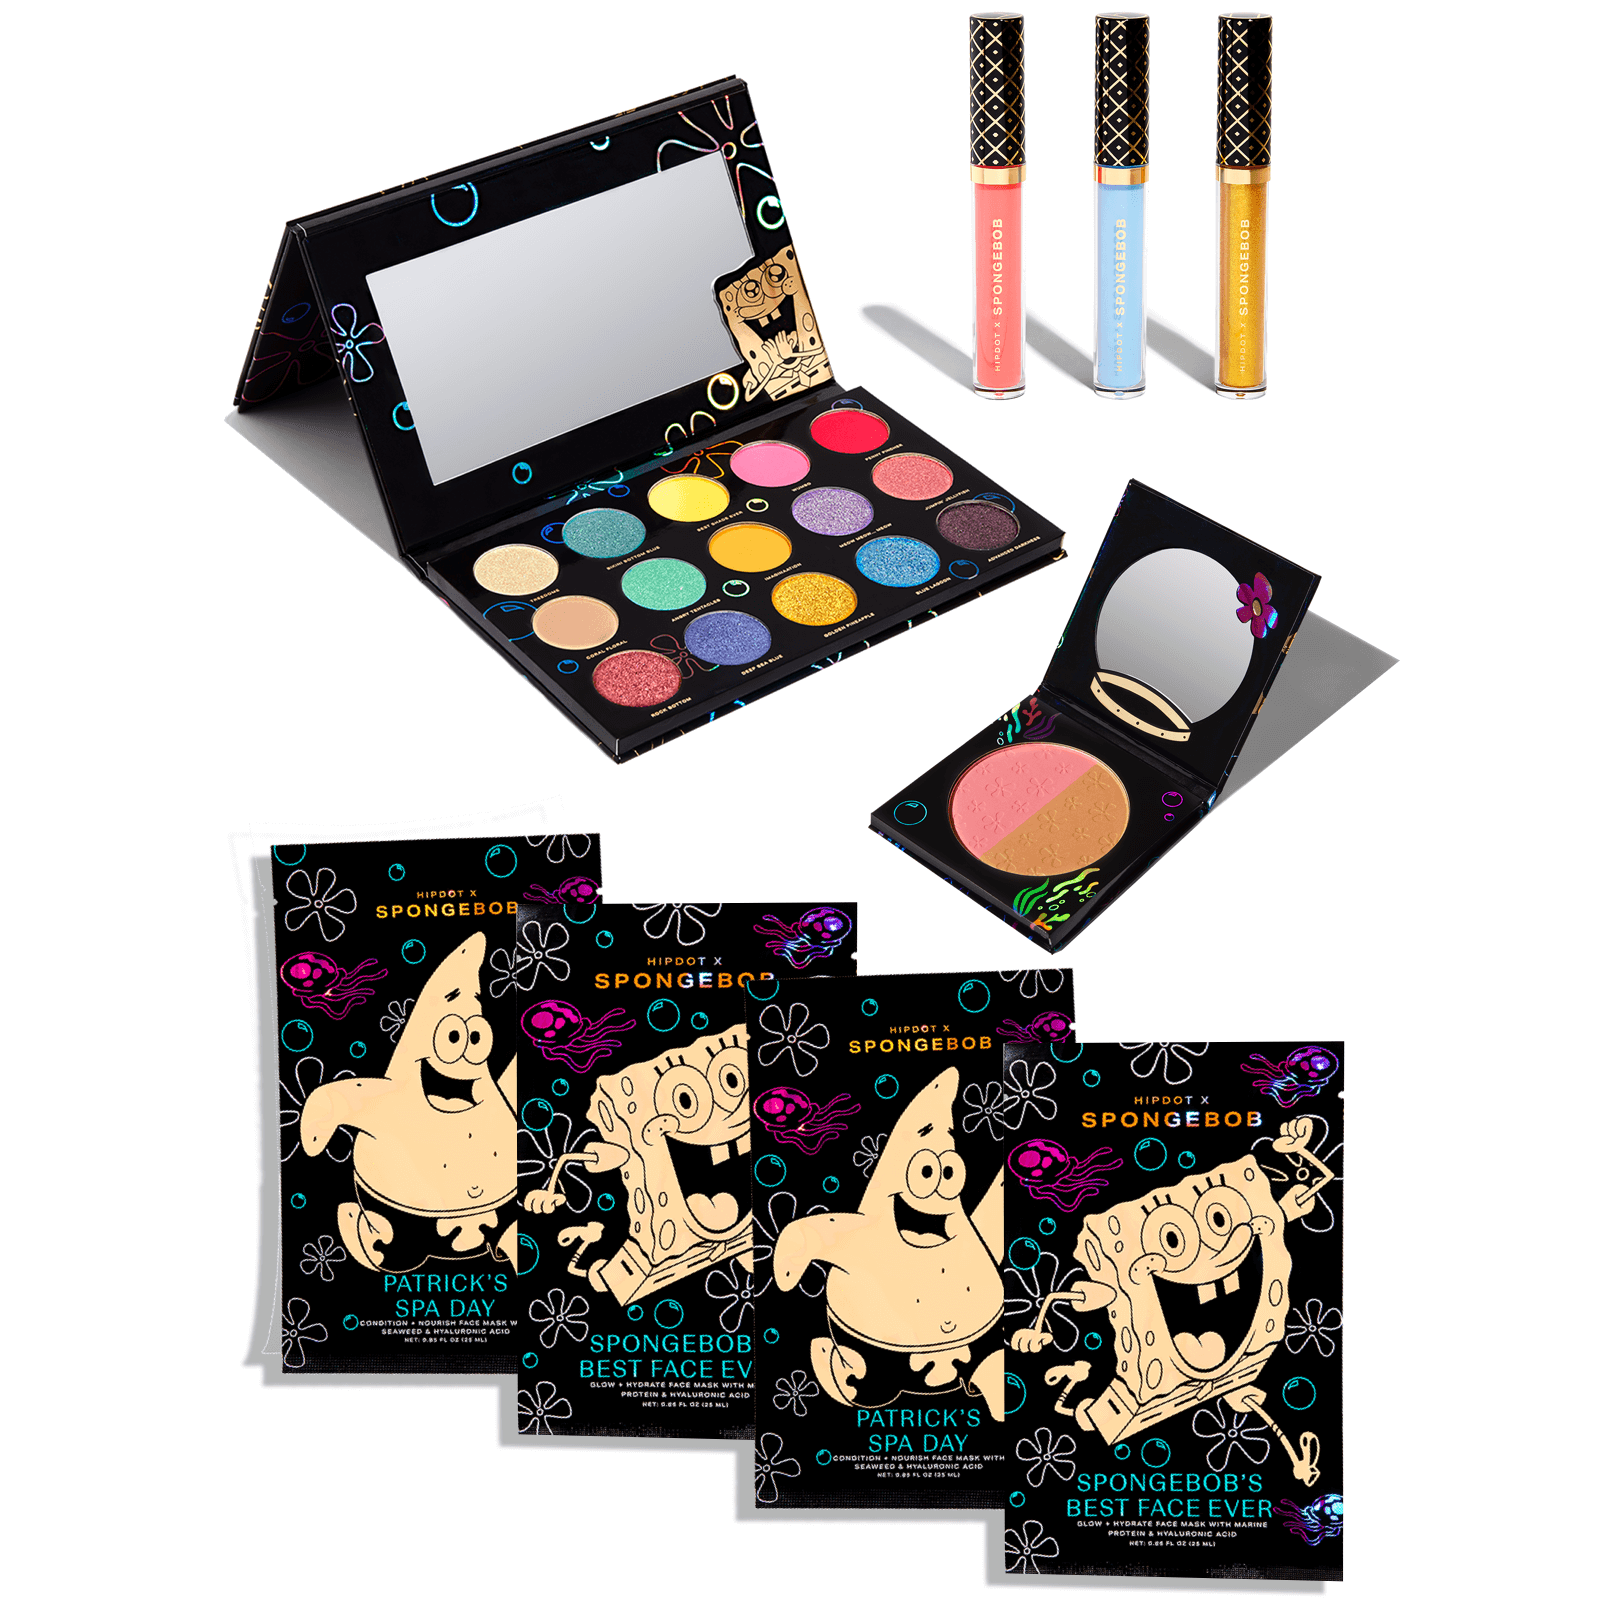 HipDot recently launched a SpongeBob-inspired makeup collection, and I can&...